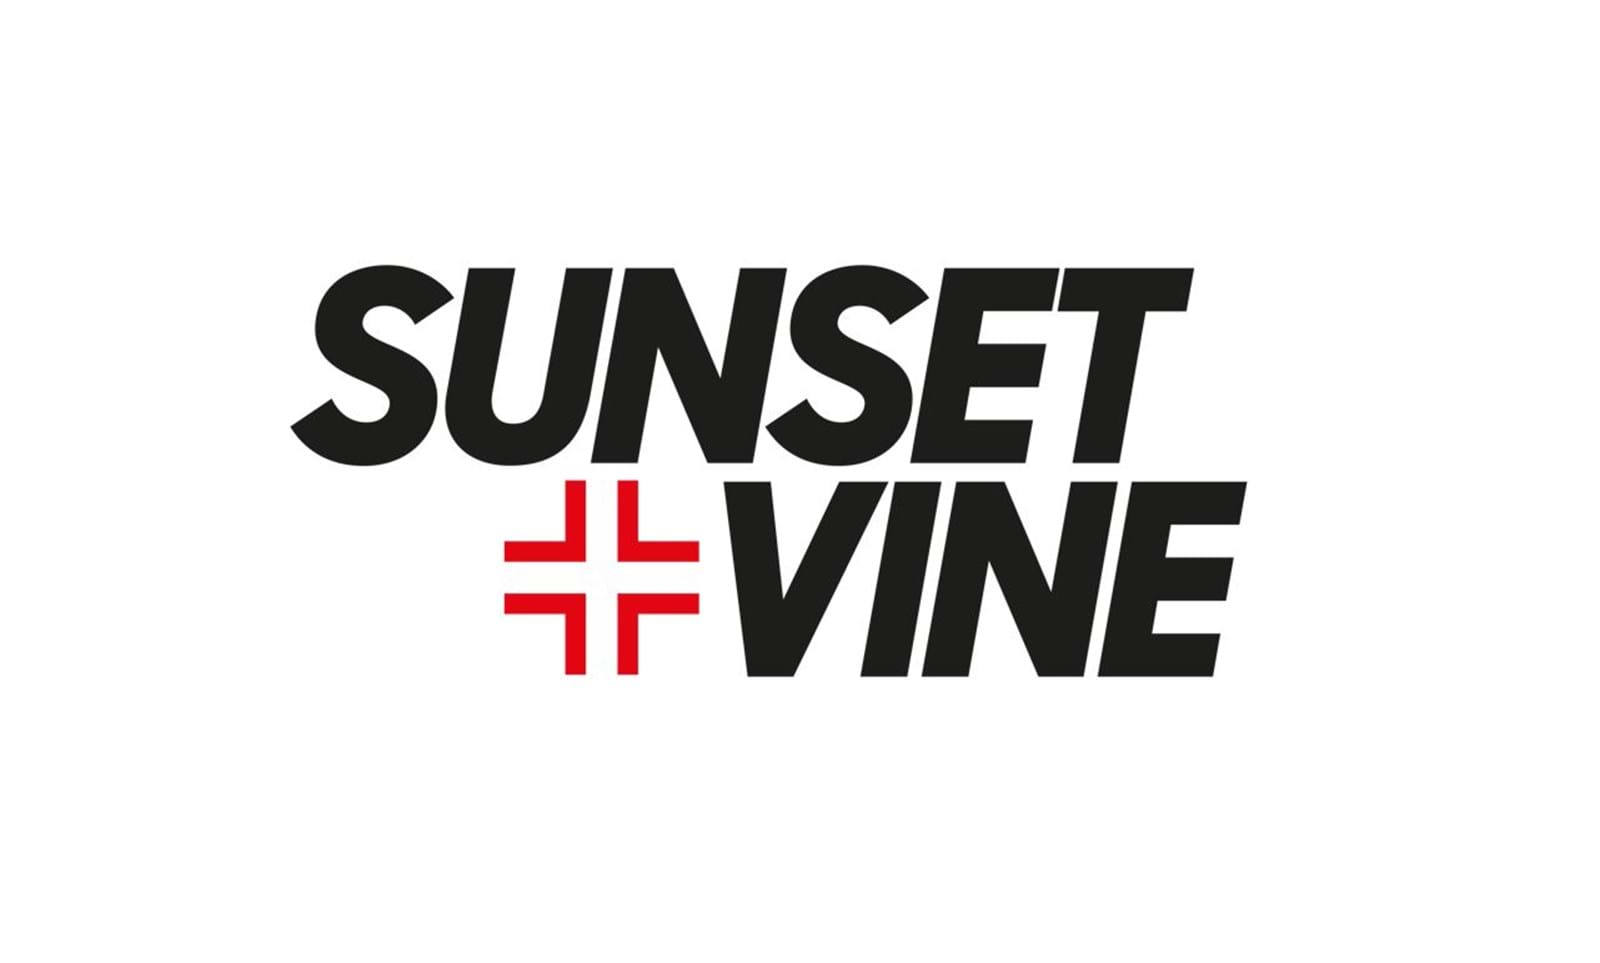 Sunset+Vine to provide BBC coverage of Indoor Bowls | Advanced Television